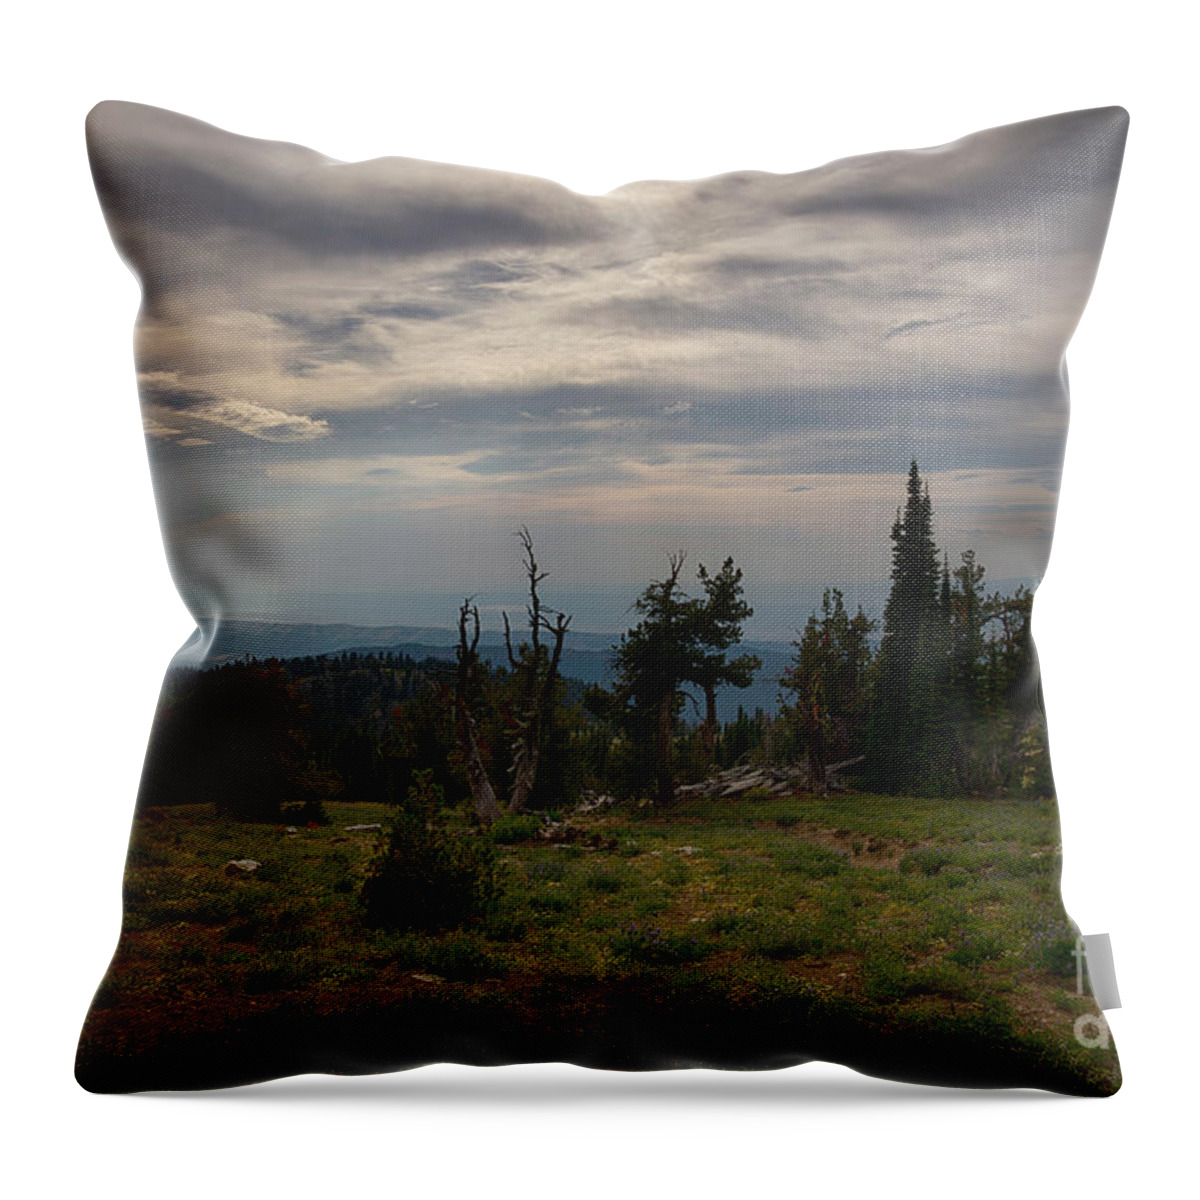 August Throw Pillow featuring the photograph Snowbank Afternoon by Idaho Scenic Images Linda Lantzy